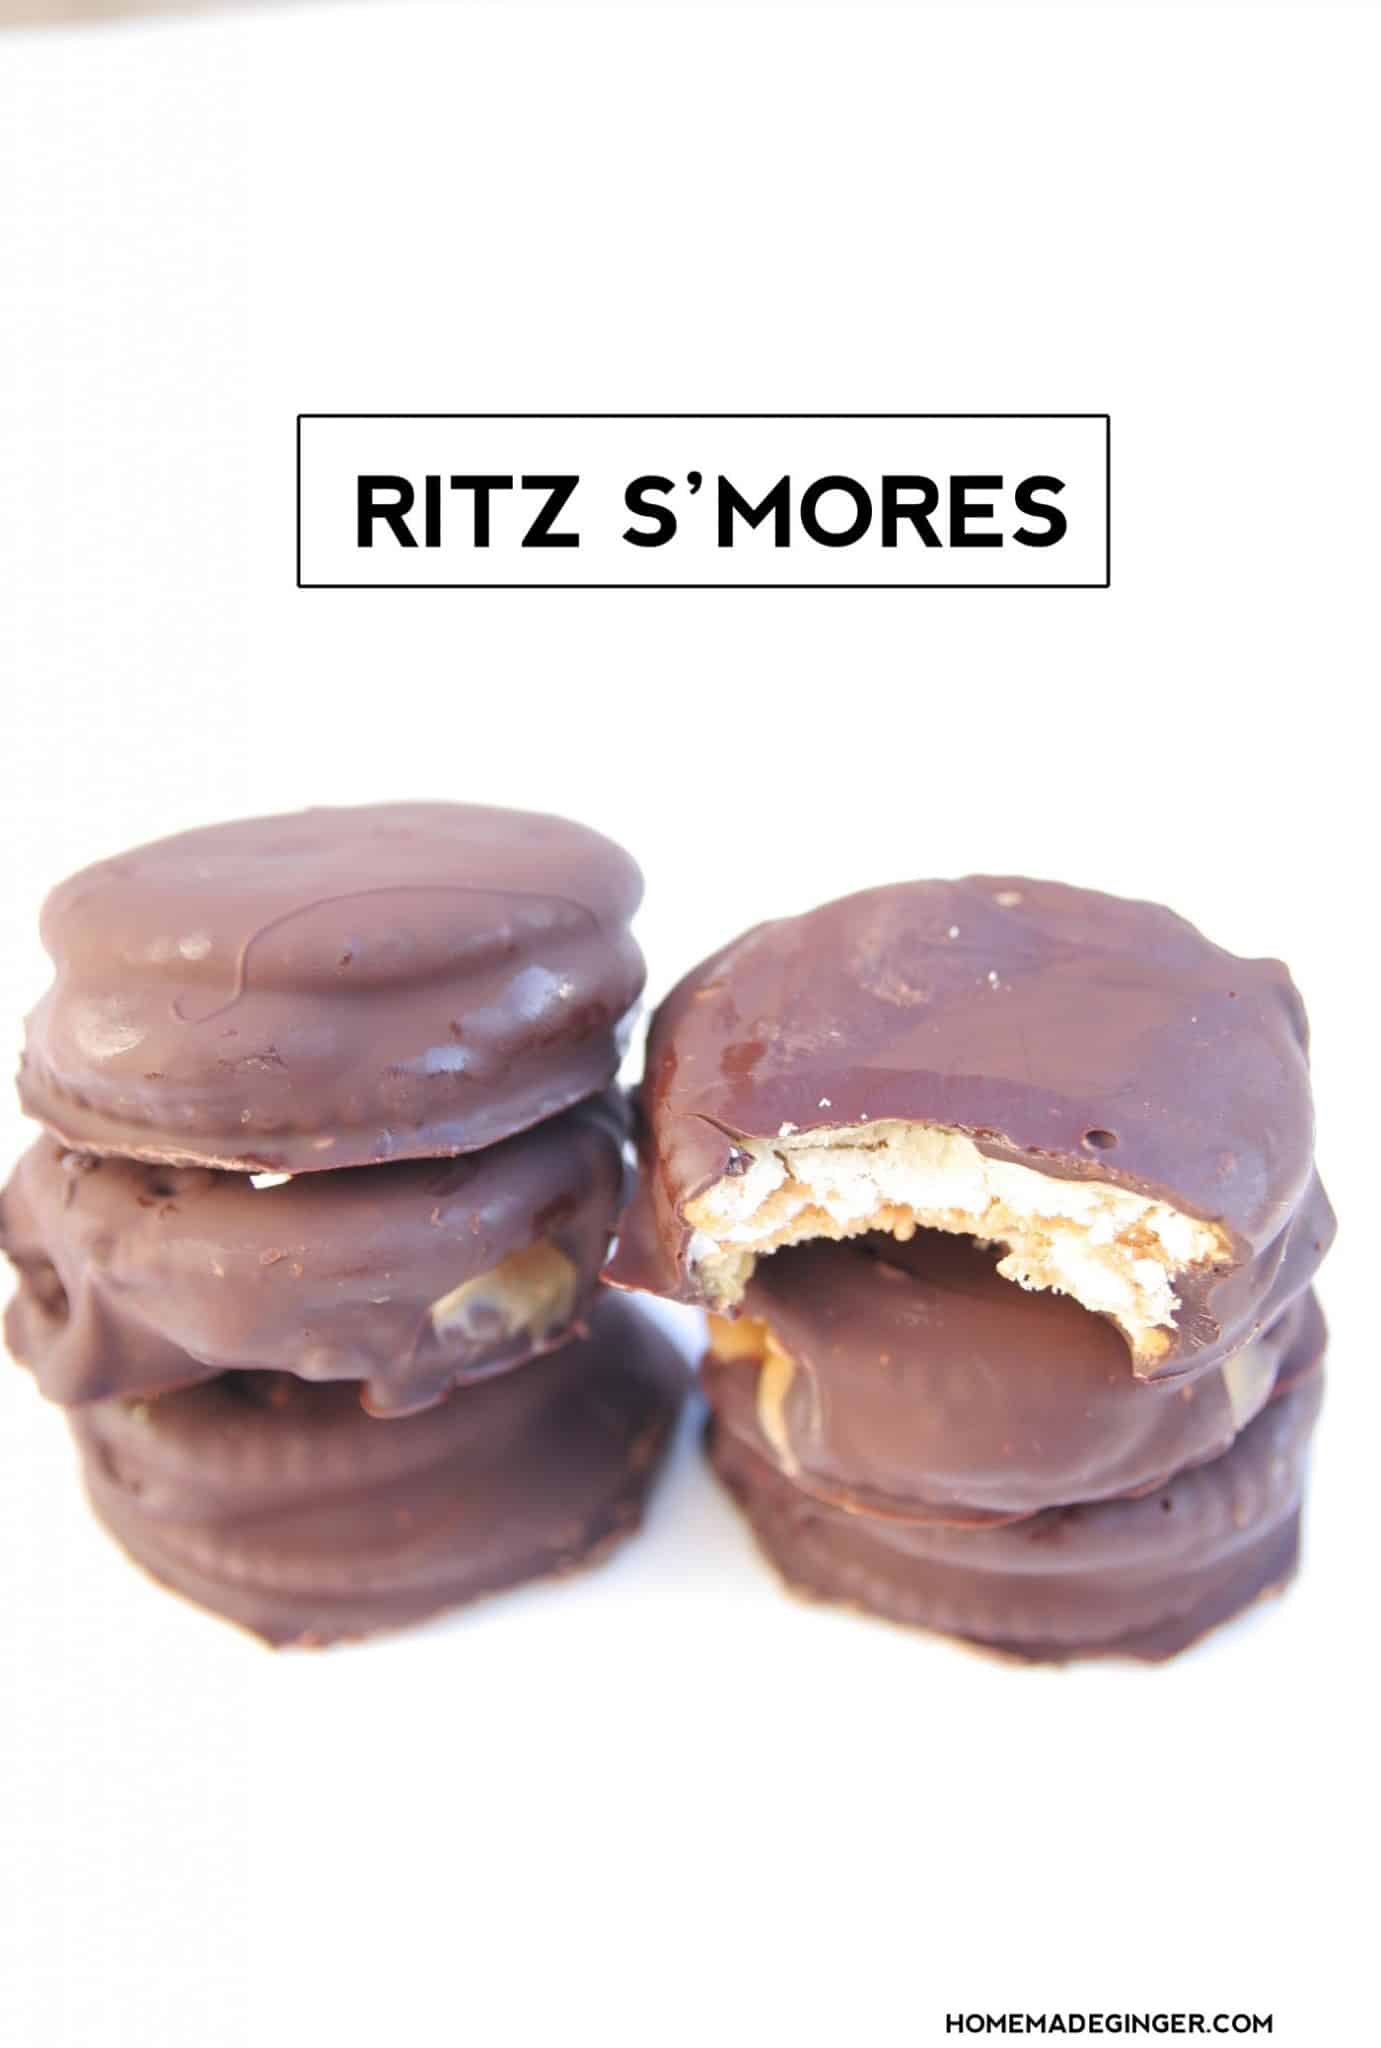 Ritz S'mores Cookies Are Sweet and Salty